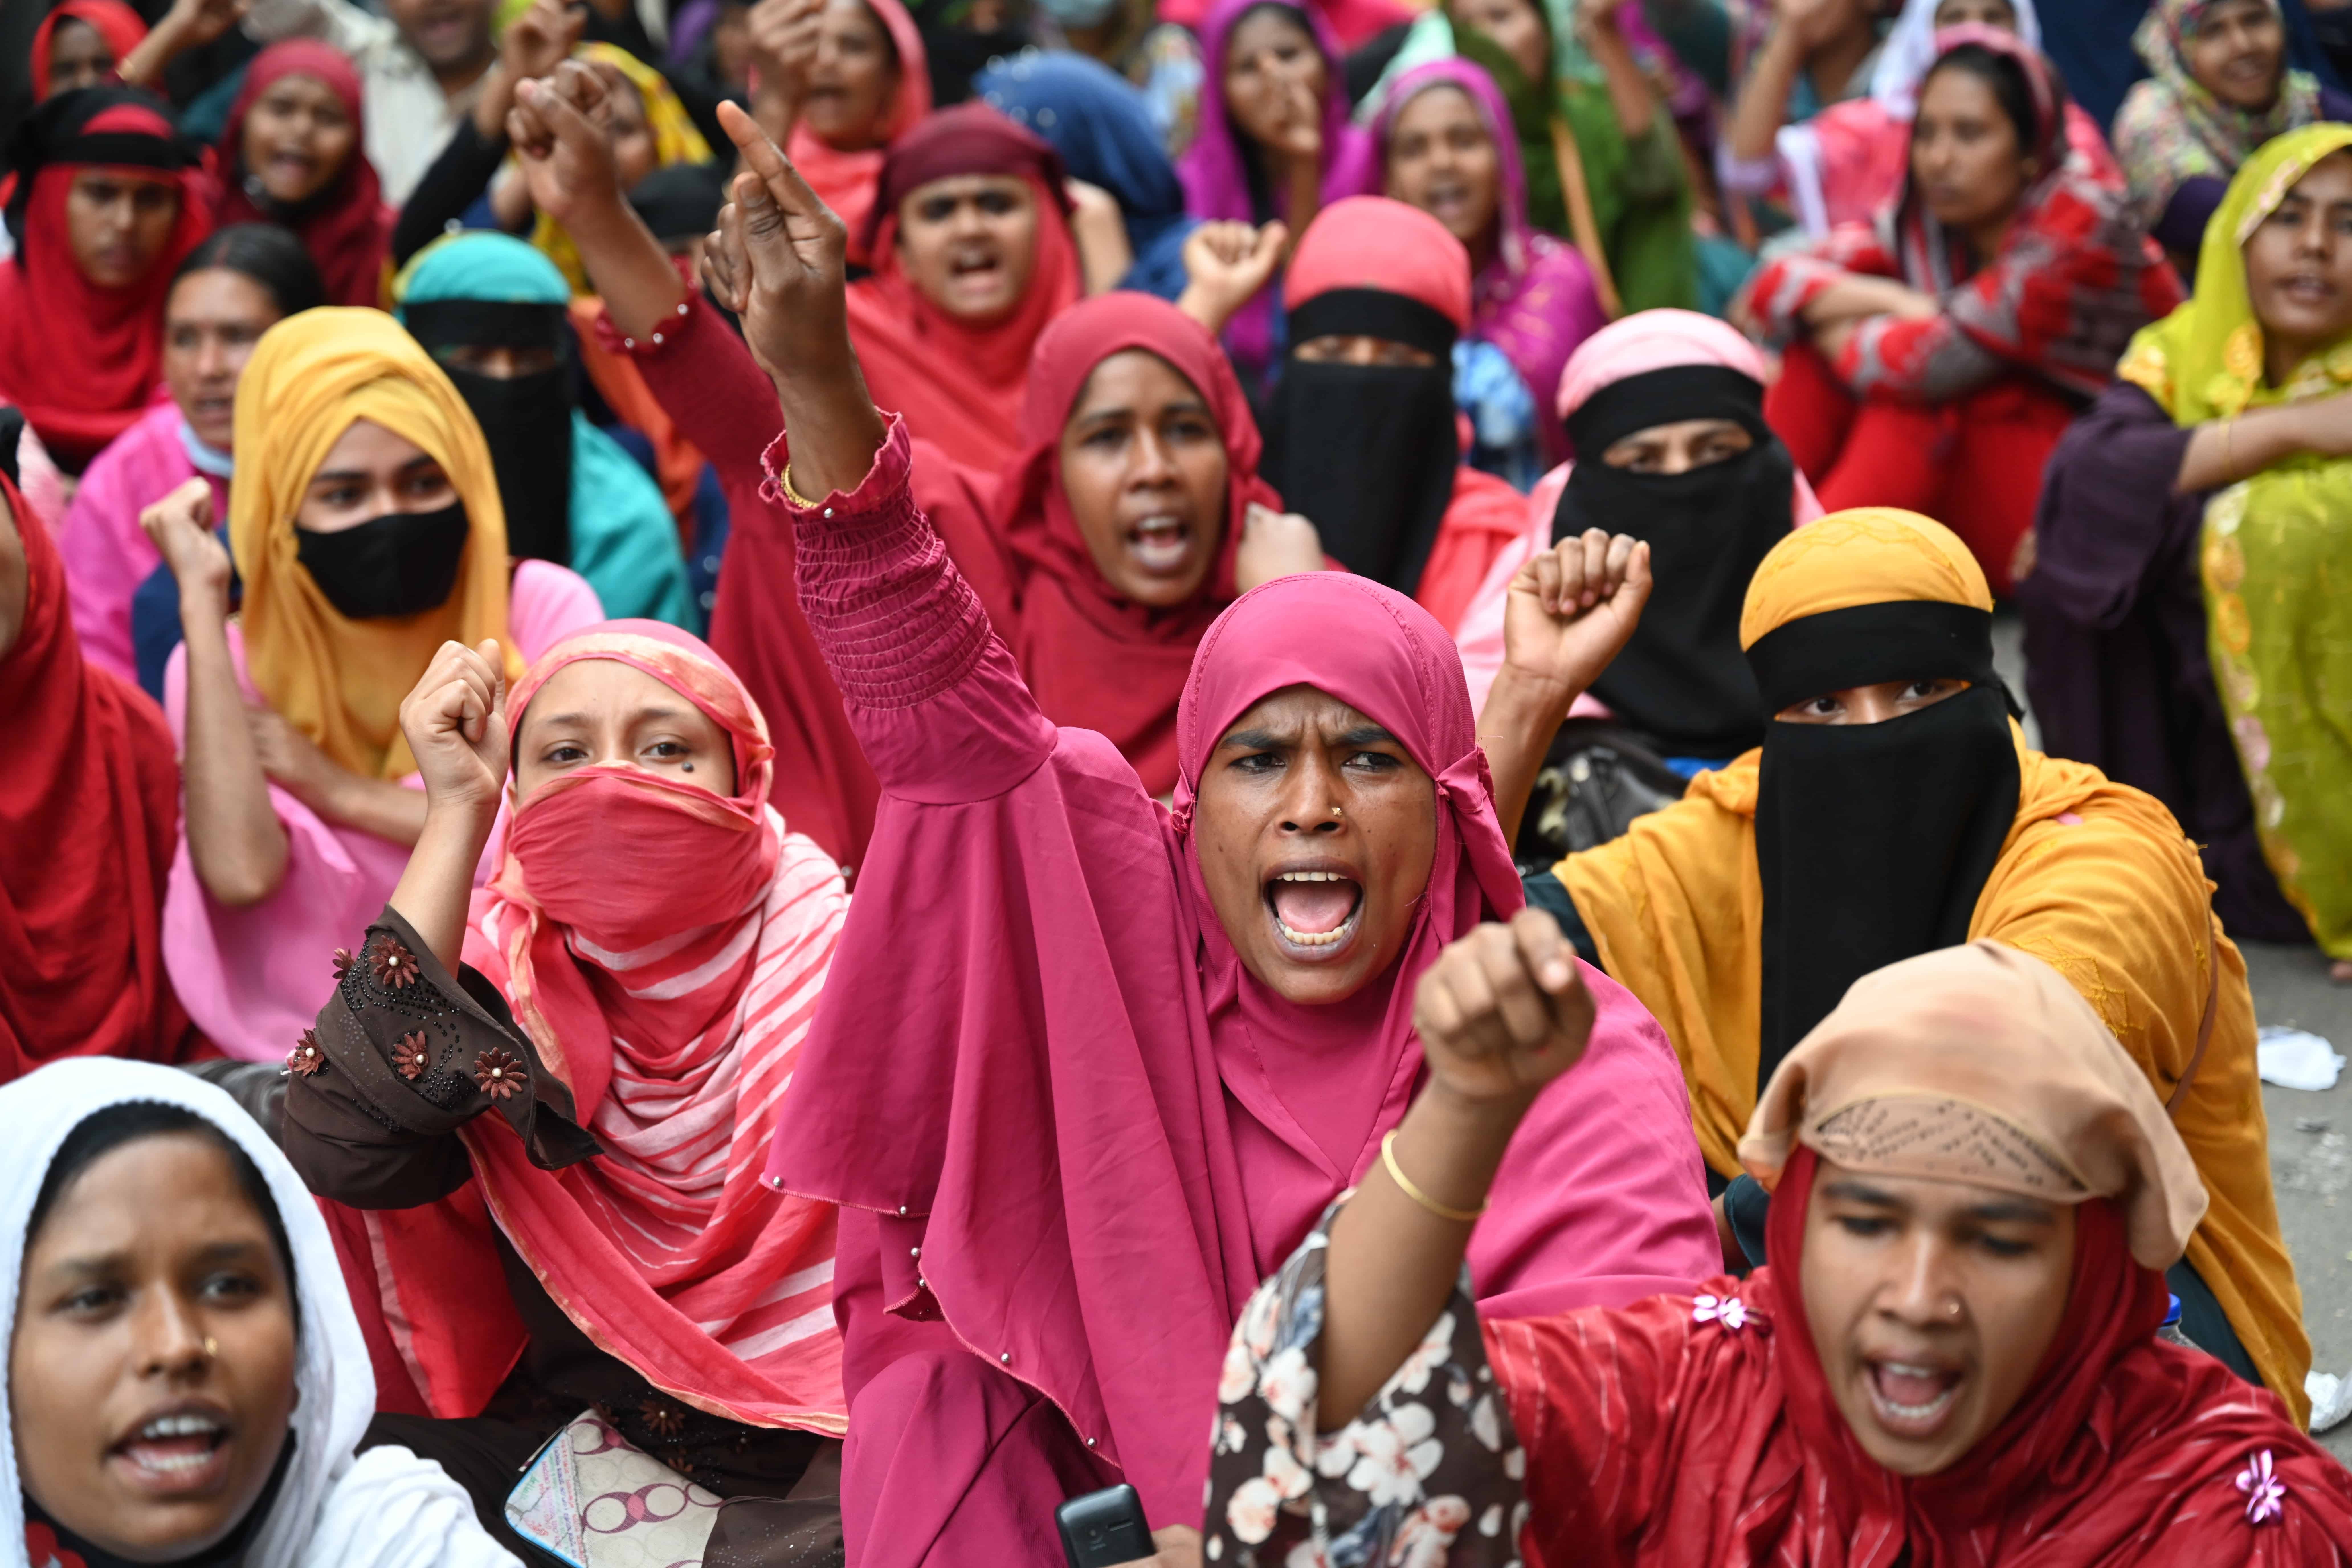 Statement: Oxfam Stands with Bangladeshi Garment Workers